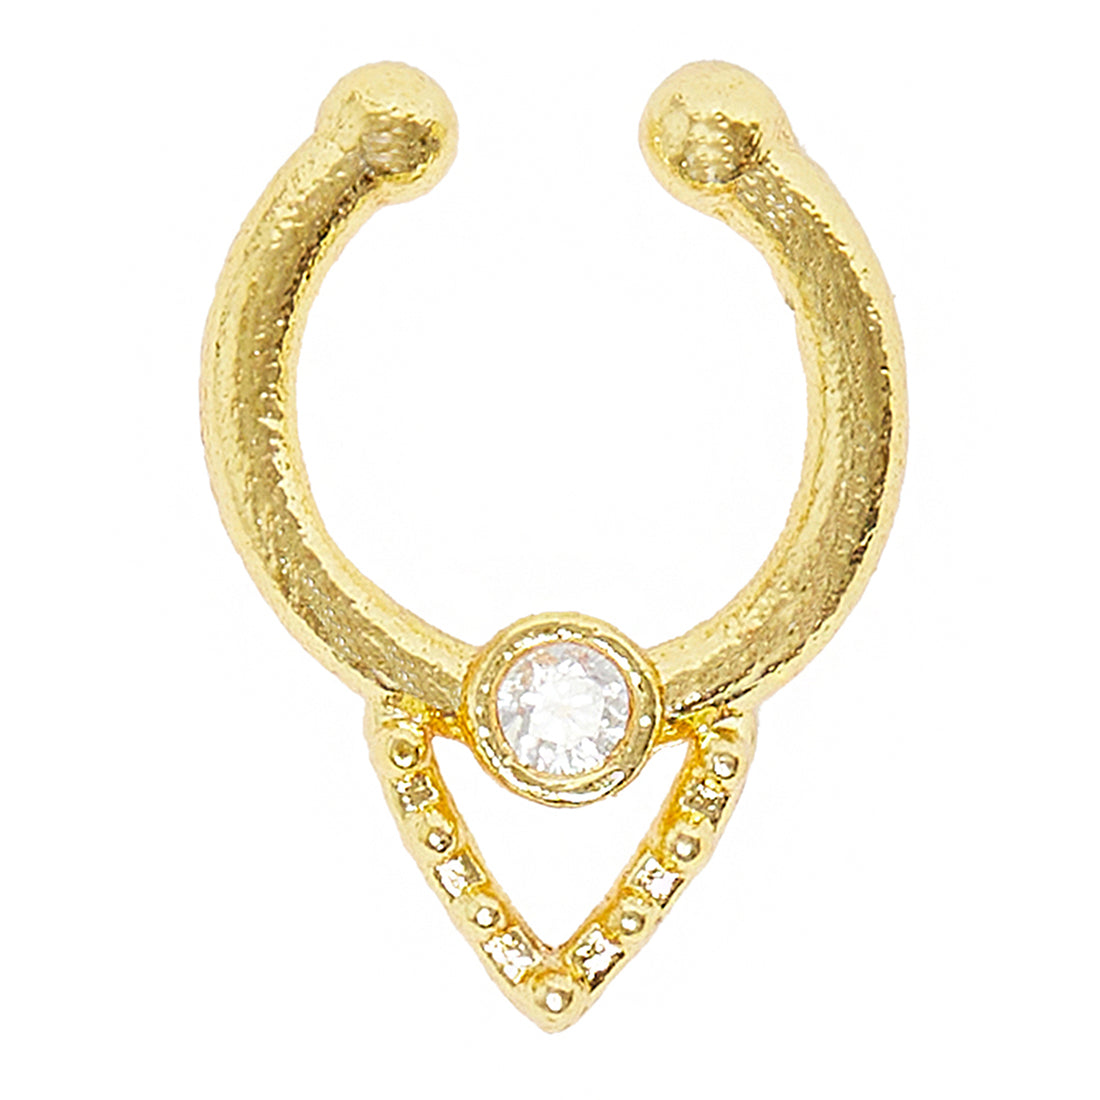 Indie Collectibles Adjustable Nose Clip in Gold Tone